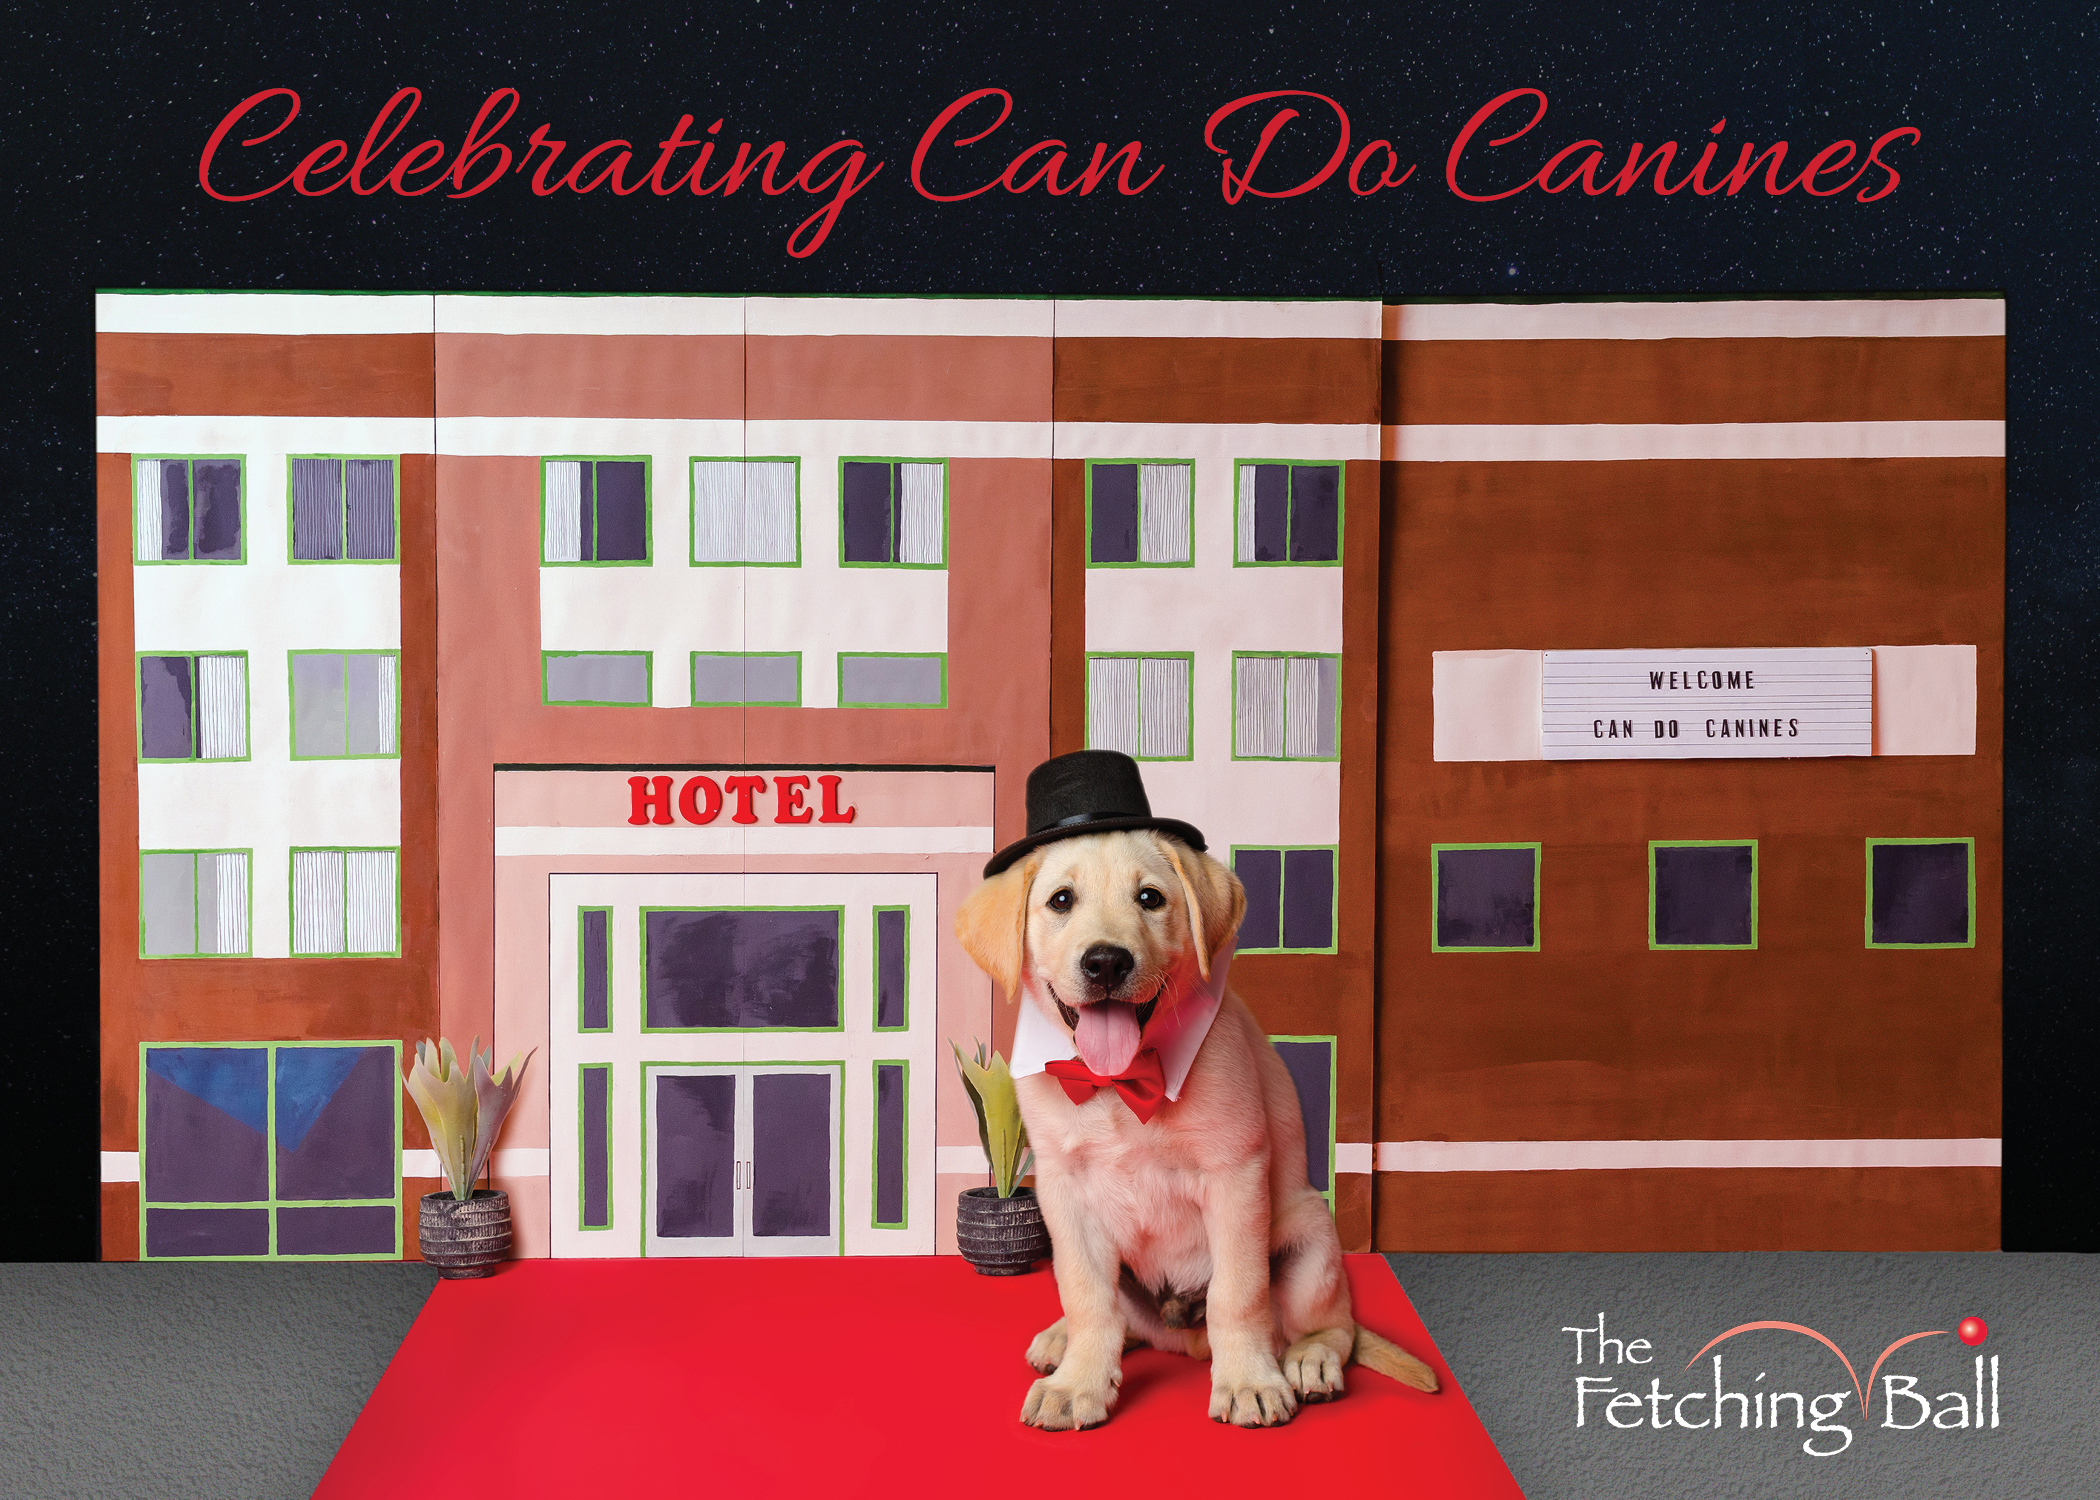 Yellow Lab puppy wearing bow tie and top hat, sitting on red carpet in front of small hotel, with text saying "Celebrating Can Do Canines" and a logo for "The Fetching Ball"